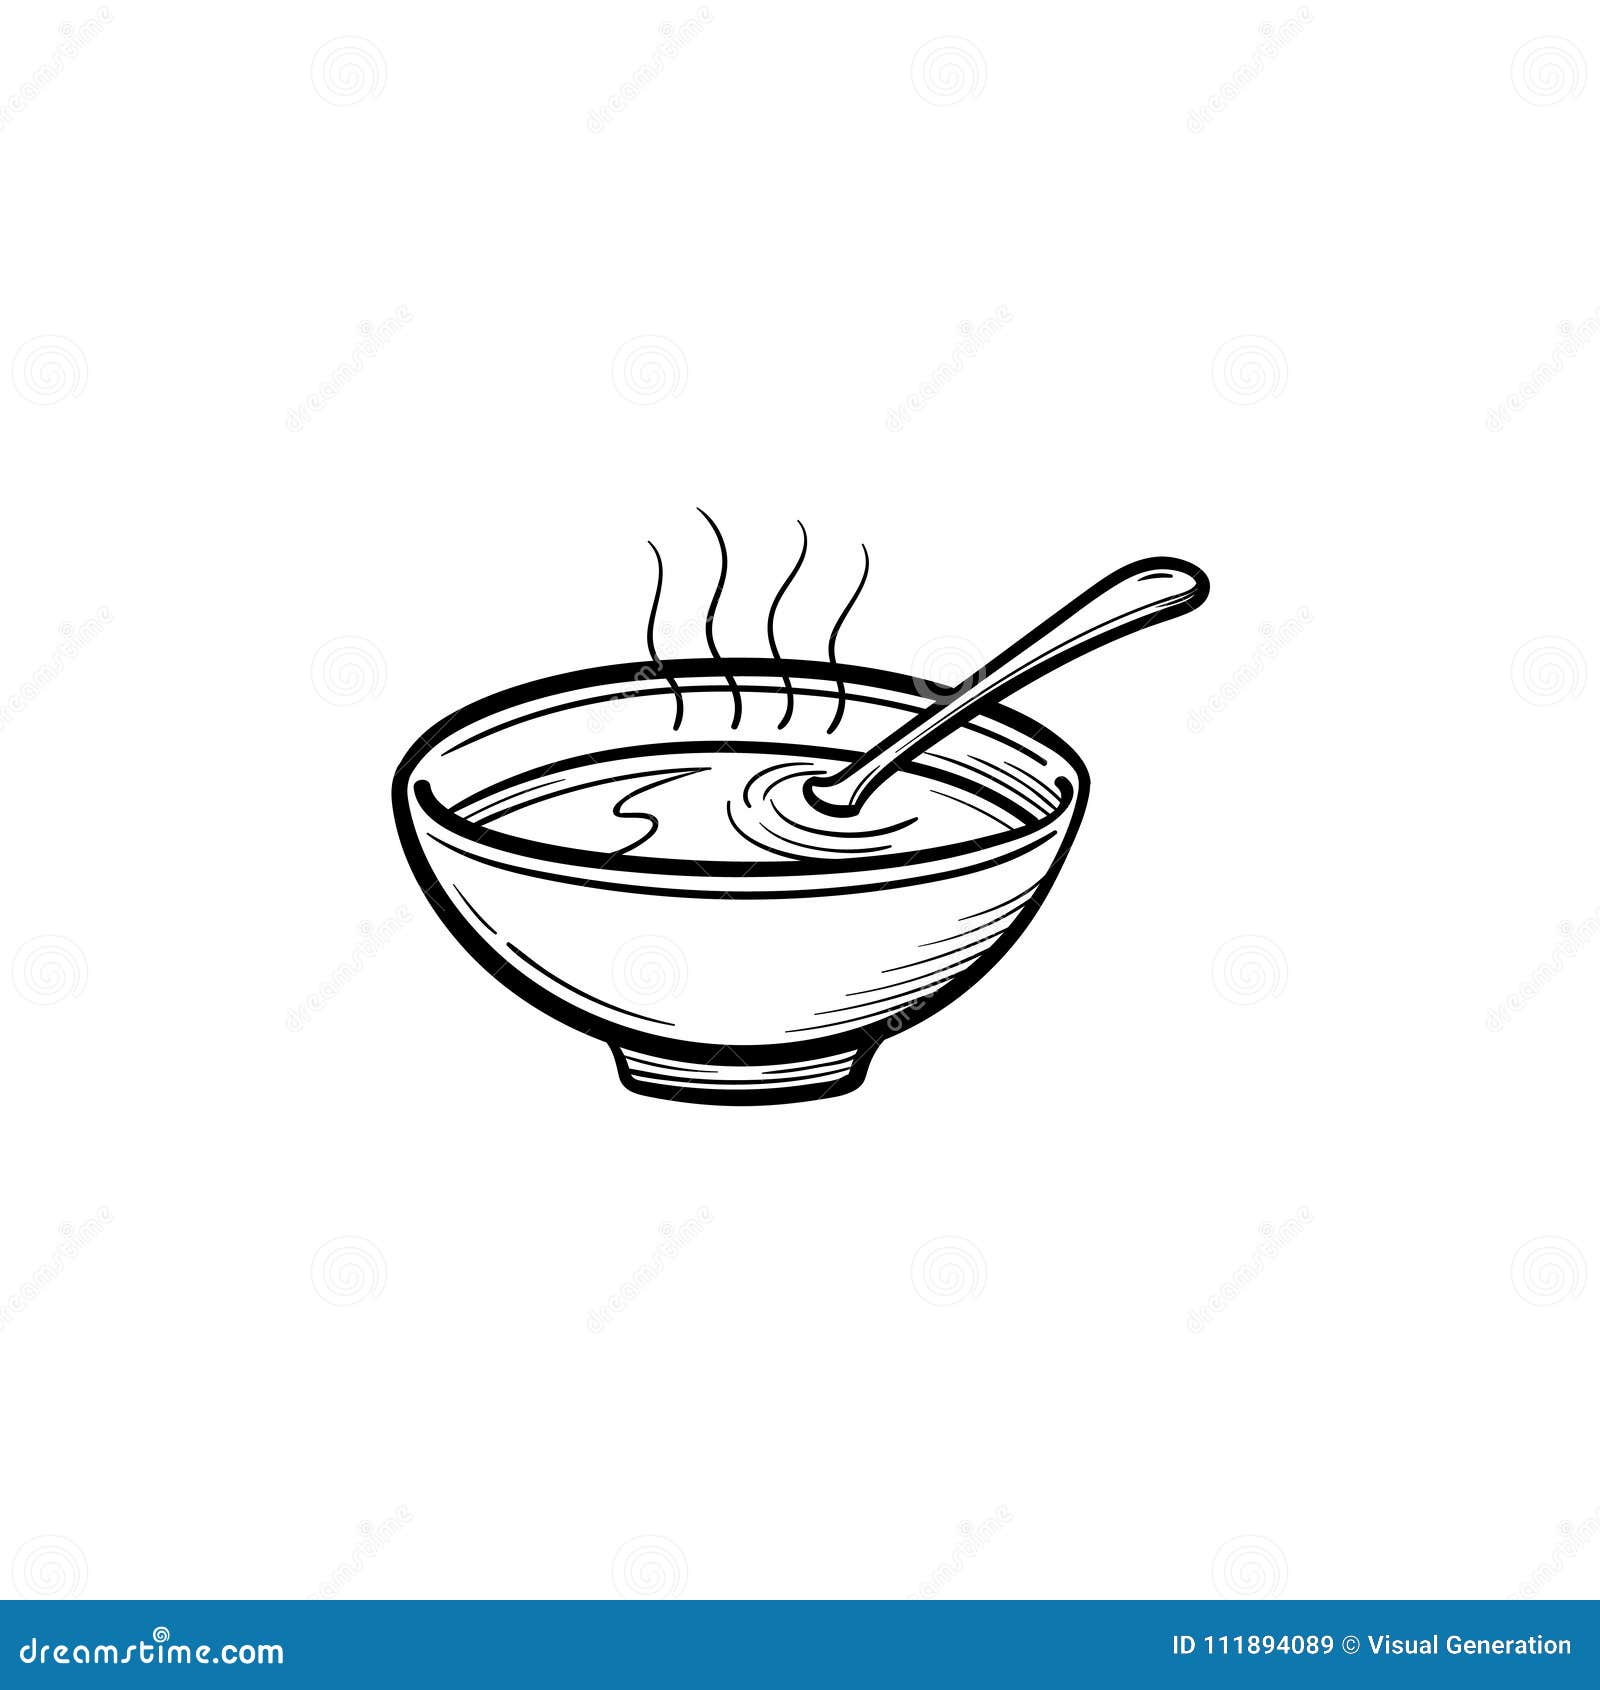 Bowl of Hot Soup Hand Drawn Sketch Icon. Stock Vector - Illustration of ...